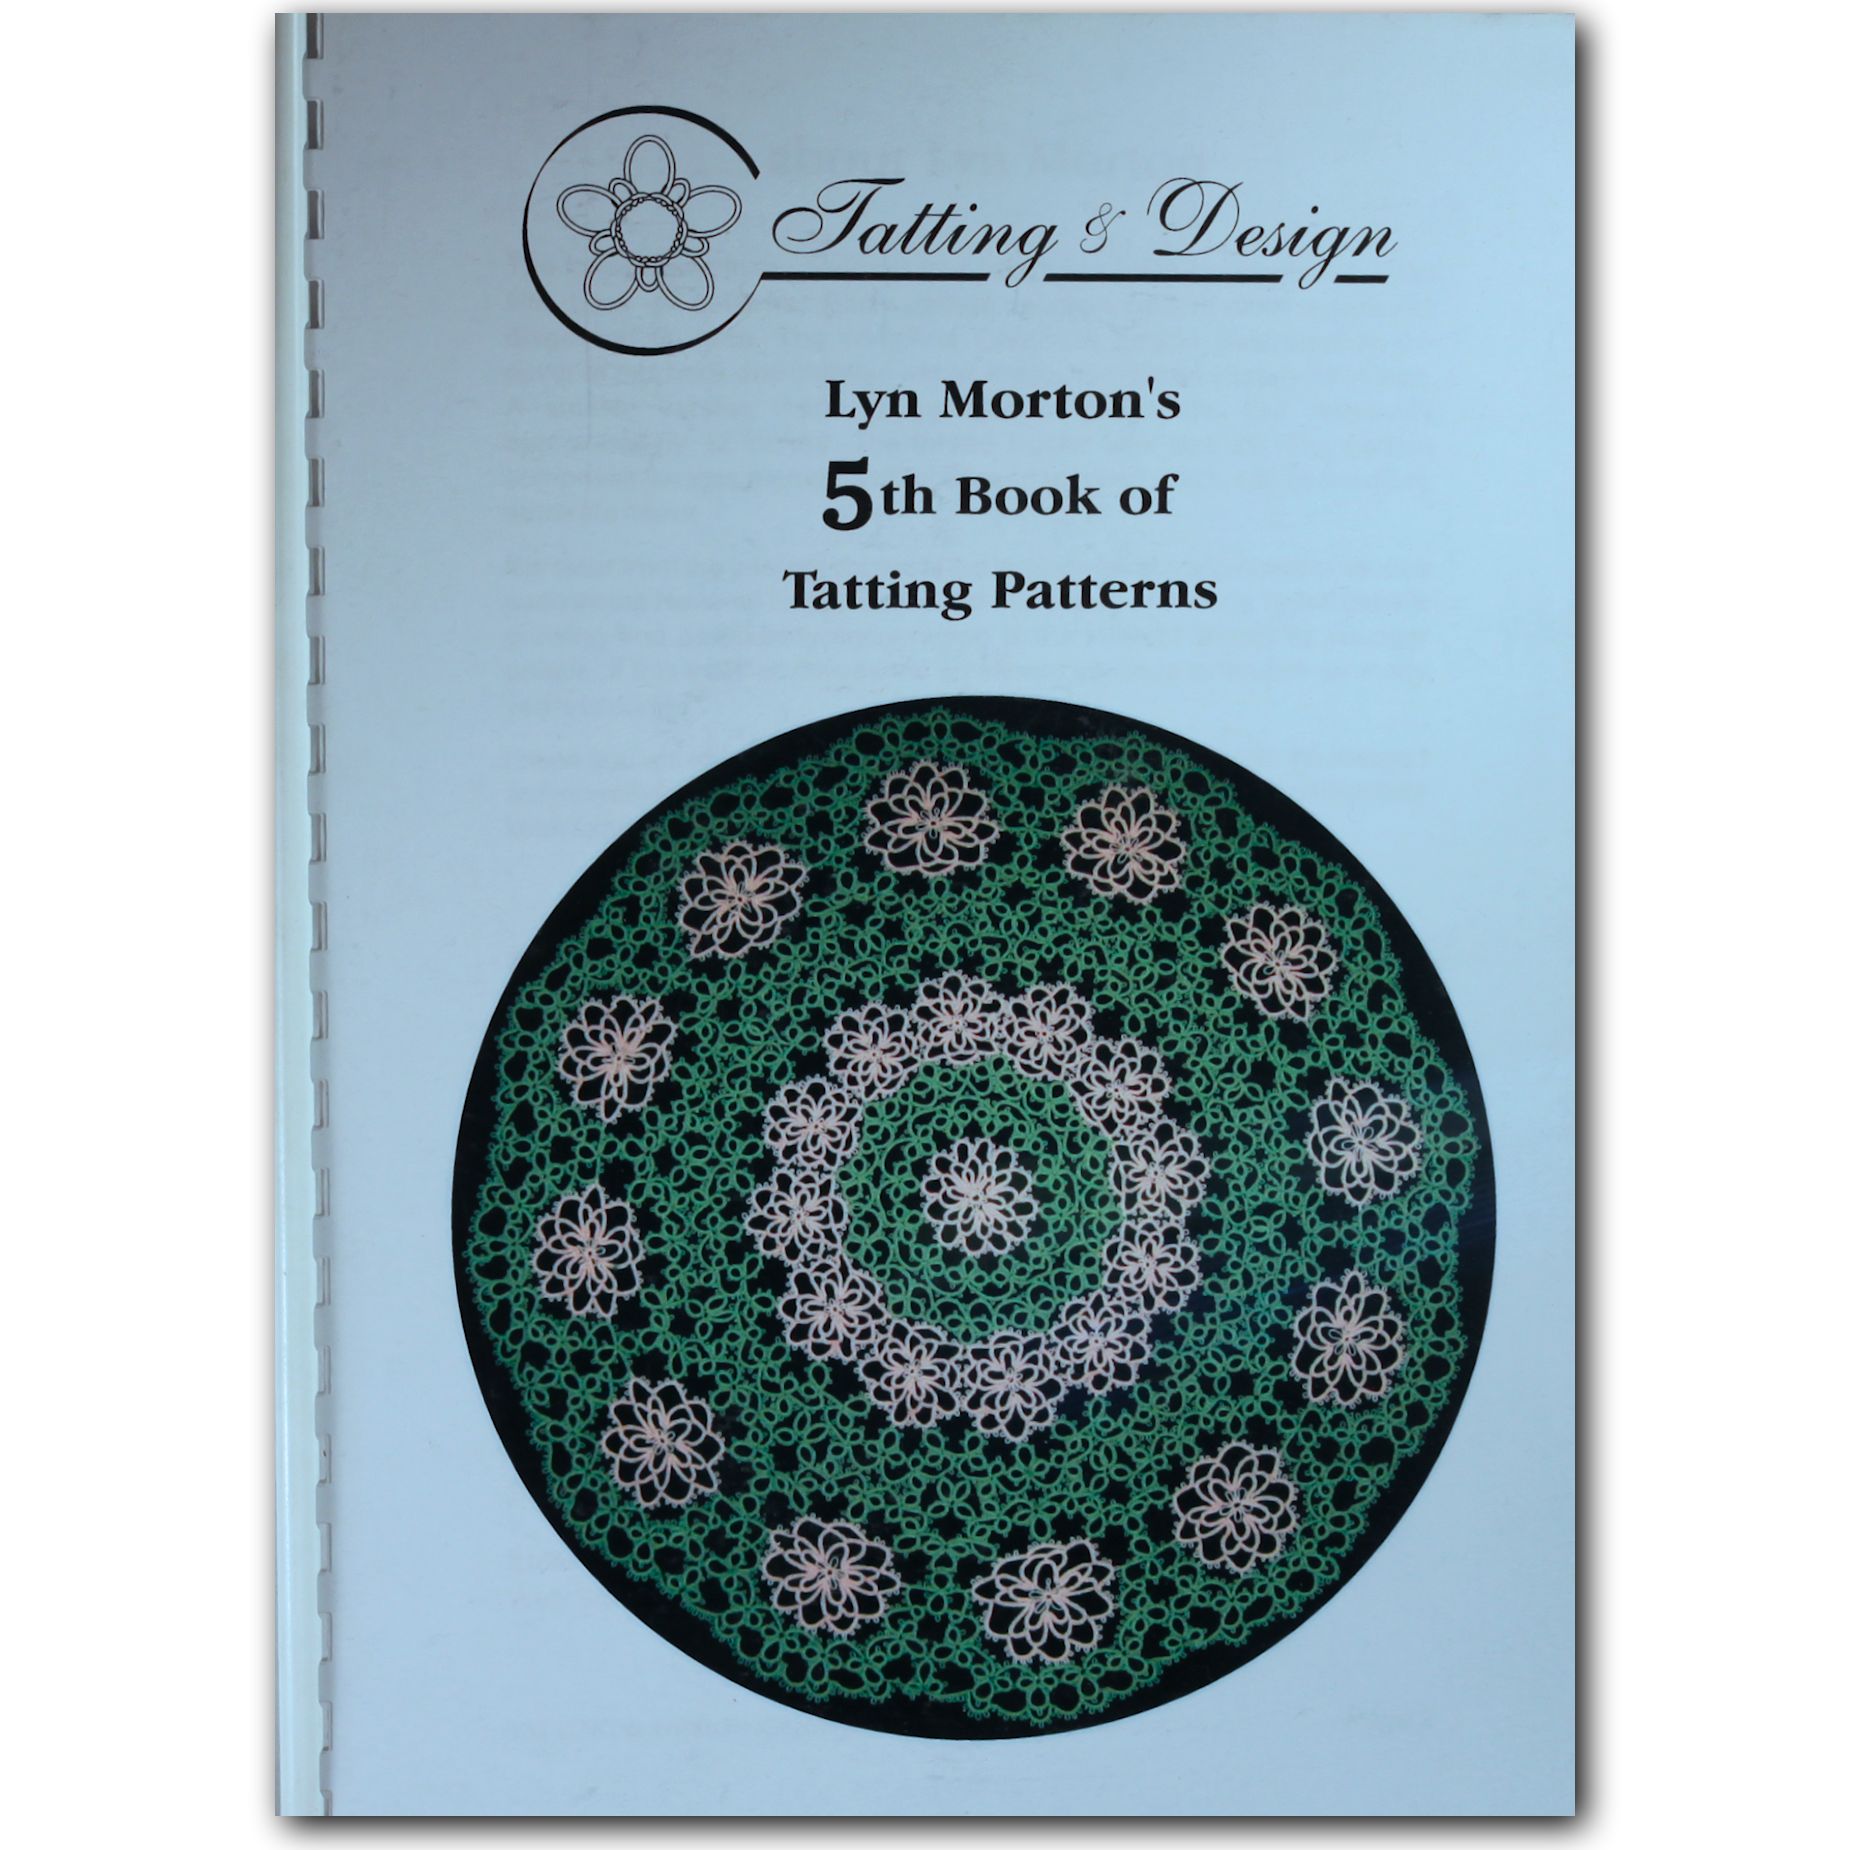 Tatting Pattern Books - Ultimate Book of Tatted Doilies